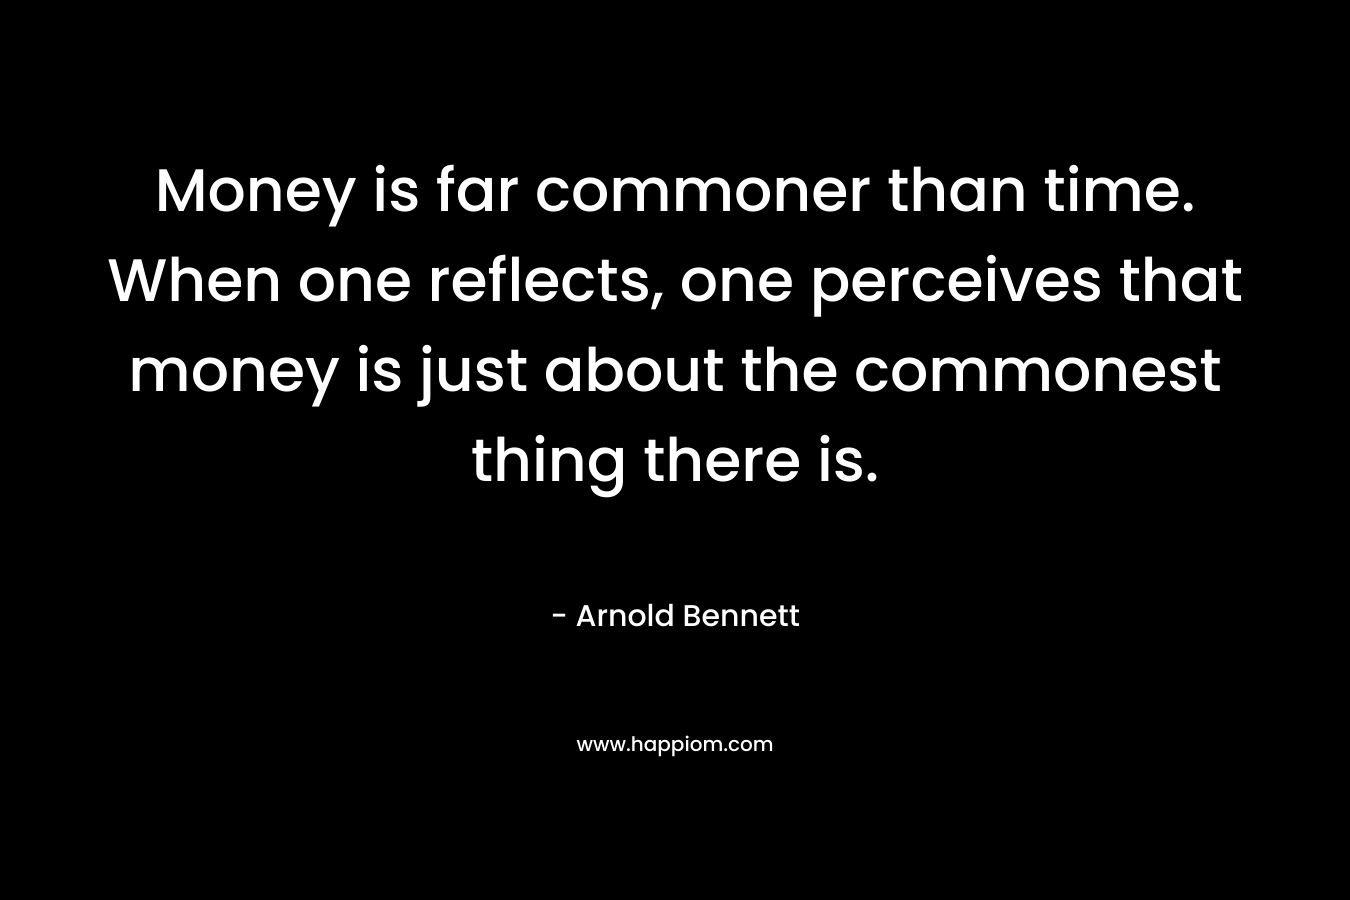 Money is far commoner than time. When one reflects, one perceives that money is just about the commonest thing there is. – Arnold Bennett